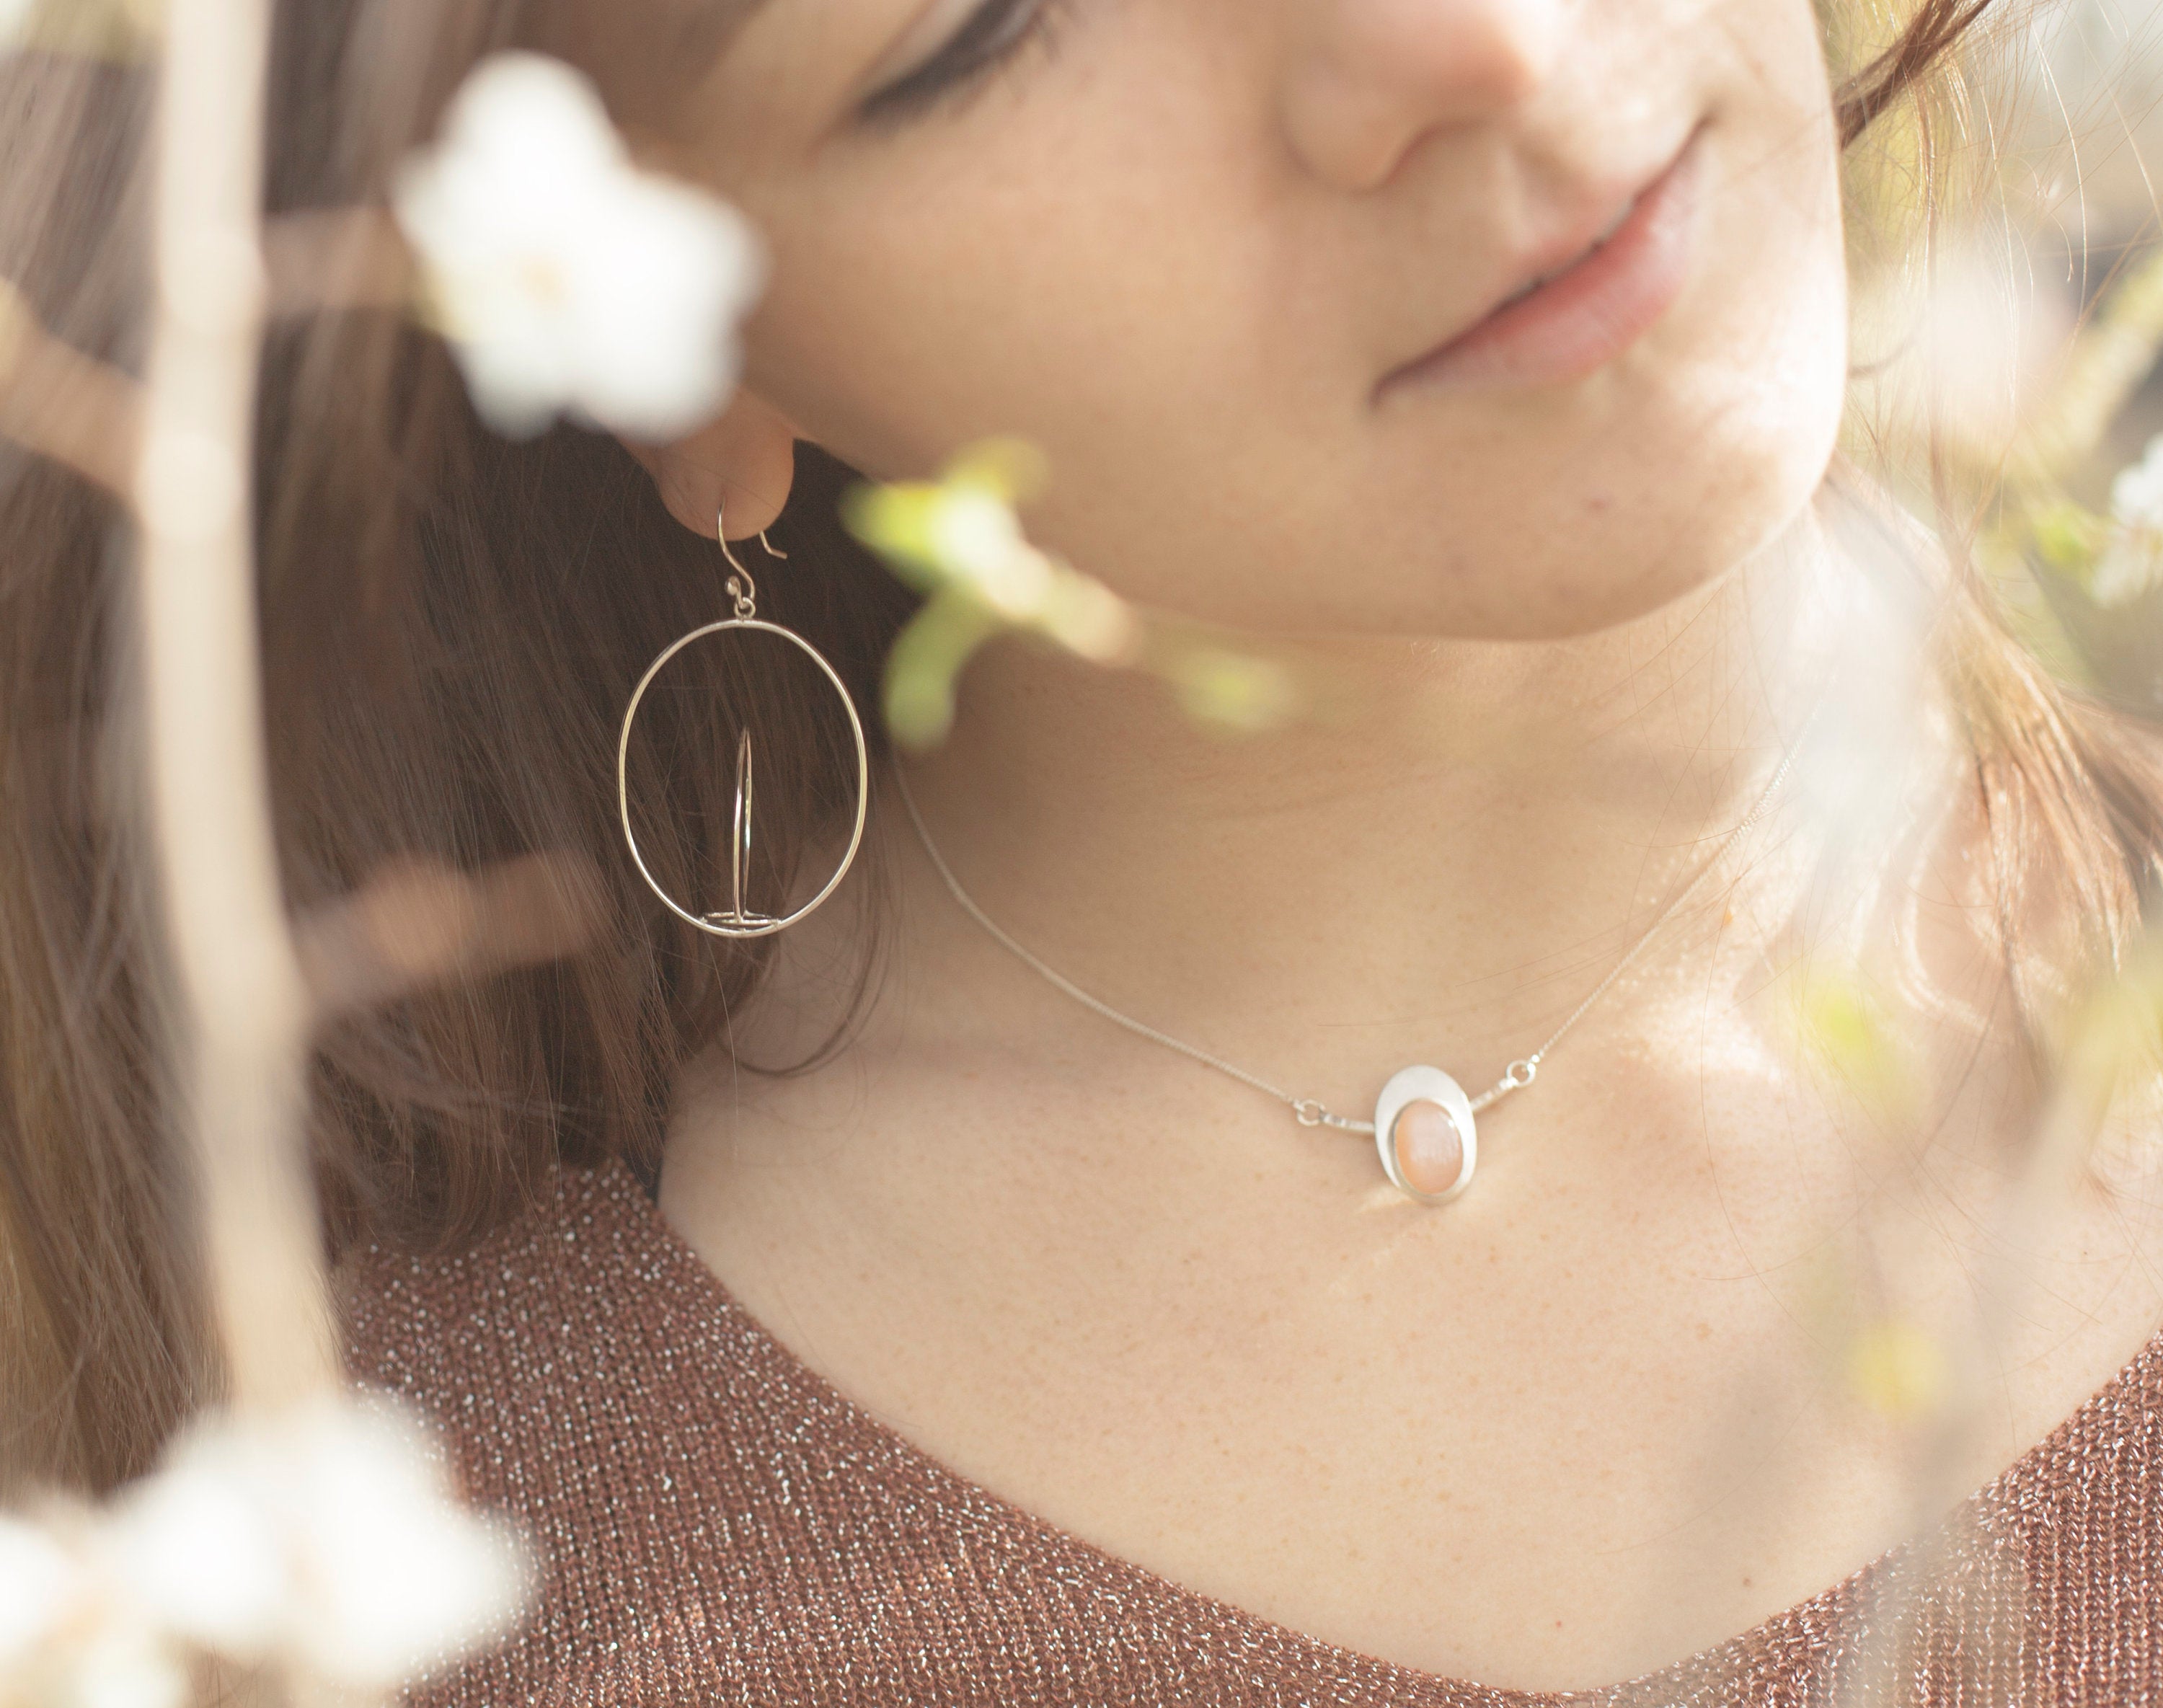 OOAK • Crossing circle earrings : 5 ways to wear them!  (in stock, ready to ship)